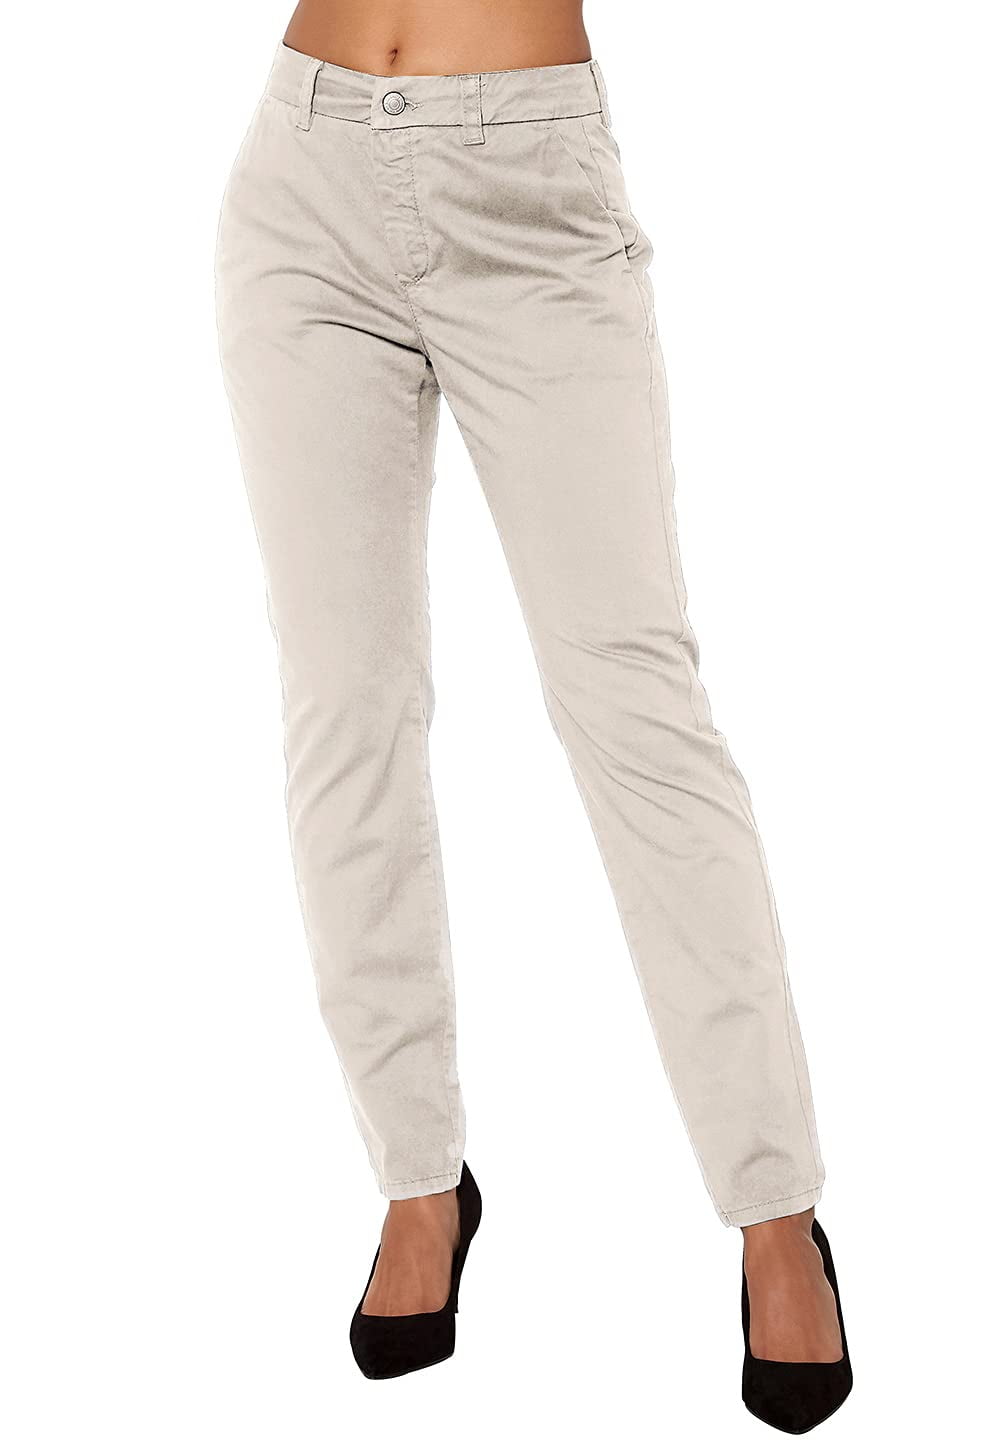 Sherrylily Womens Mid-Rise Stretch Twill Chino Pants Casual Work Pants ...